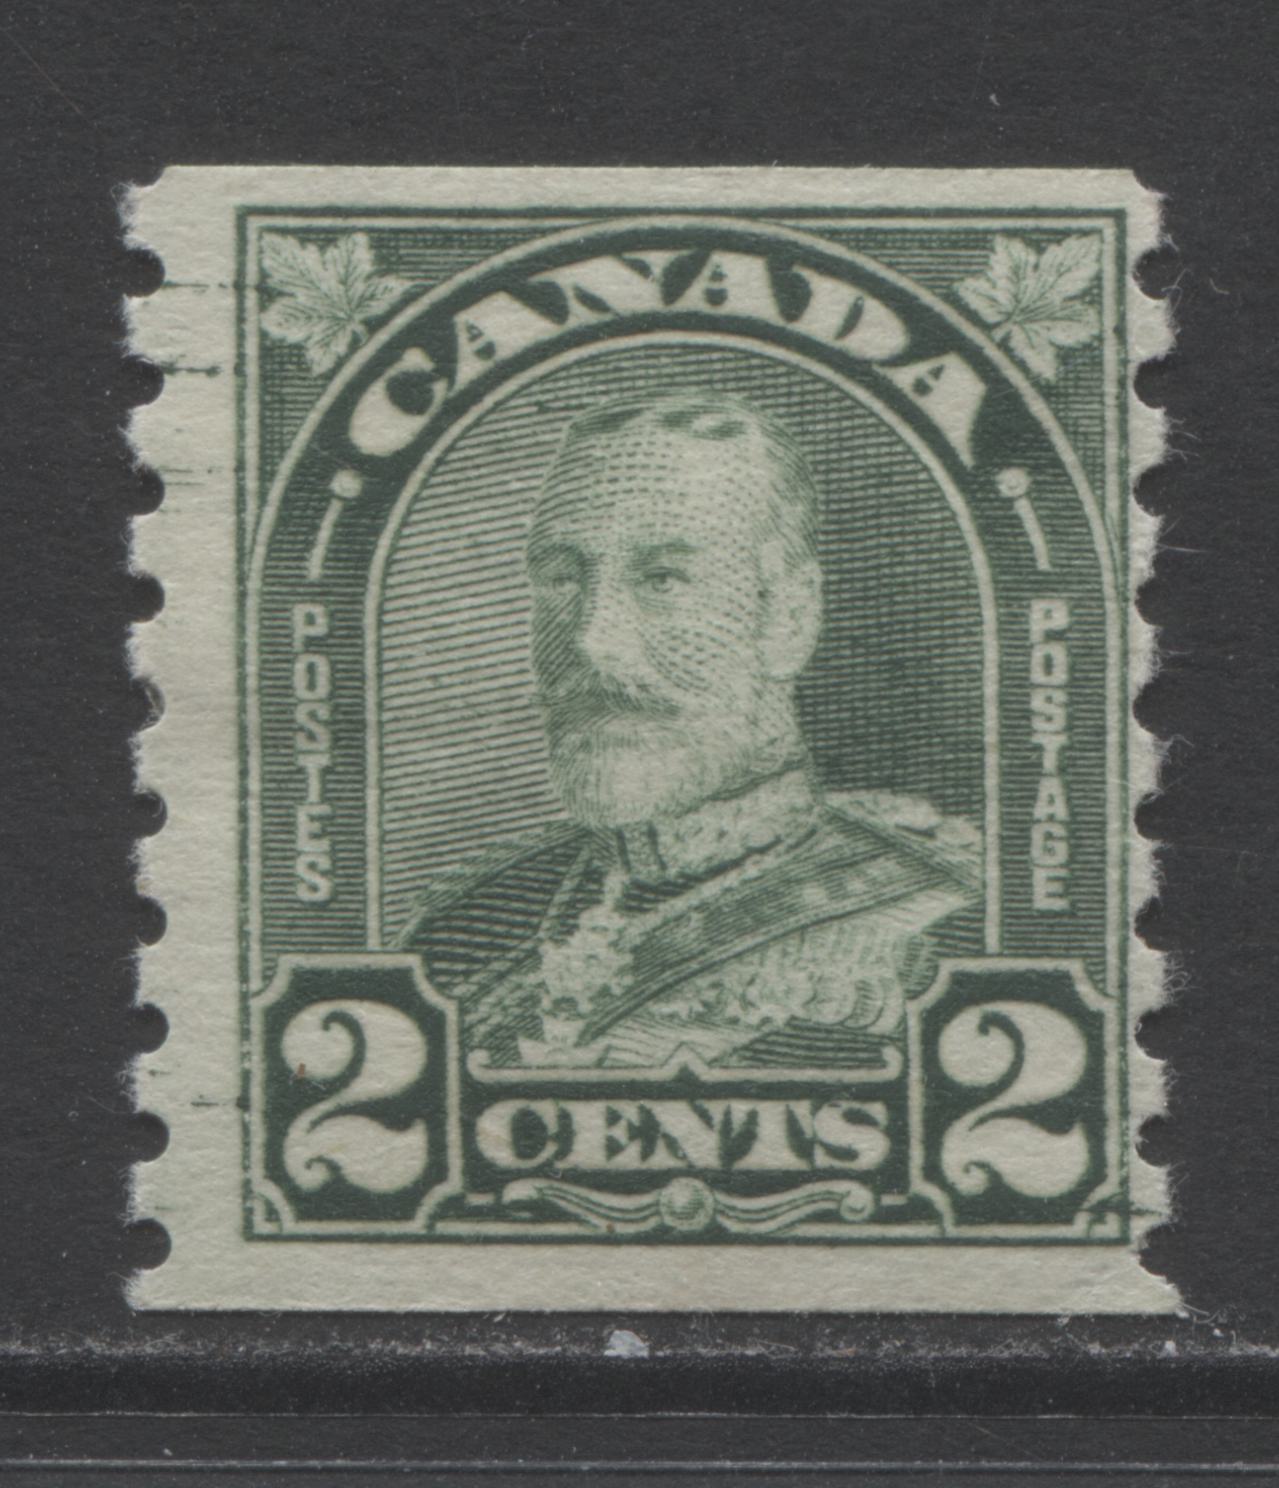 Lot 235 Canada #180 2c Dull Green King George V, 1930-1931 Arch/Leaf Coil Issue, A FOG Coil Single Showing Plate Cracks At UL & LR